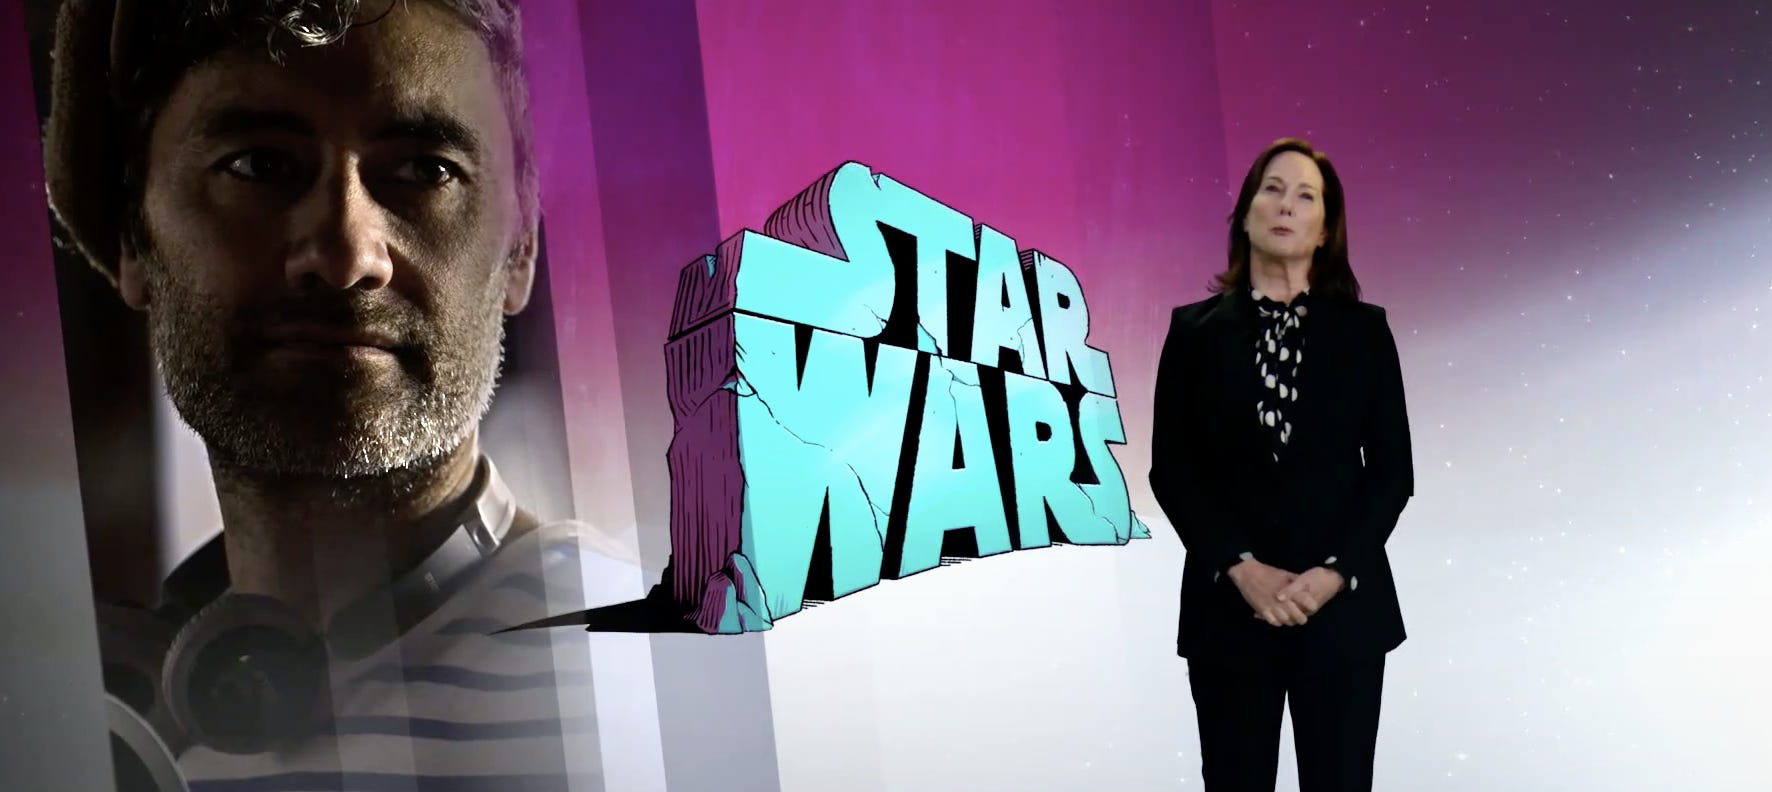 <p>It's believed this will be Taika Waititi's ("Thor: Love and Thunder") "Star Wars" movie.</p><p>"Taika's approach to 'Star Wars' will be fresh, unexpected, and…unique," Lucasfilm president Kathleen Kennedy said on Disney's 2020 investor day of Waititi. "His enormous talent and sense of humor will ensure that audiences are in for an unforgettable ride."</p><p>We expect more "Star Wars" projects to be announced at Star Wars Celebration event in April.</p>